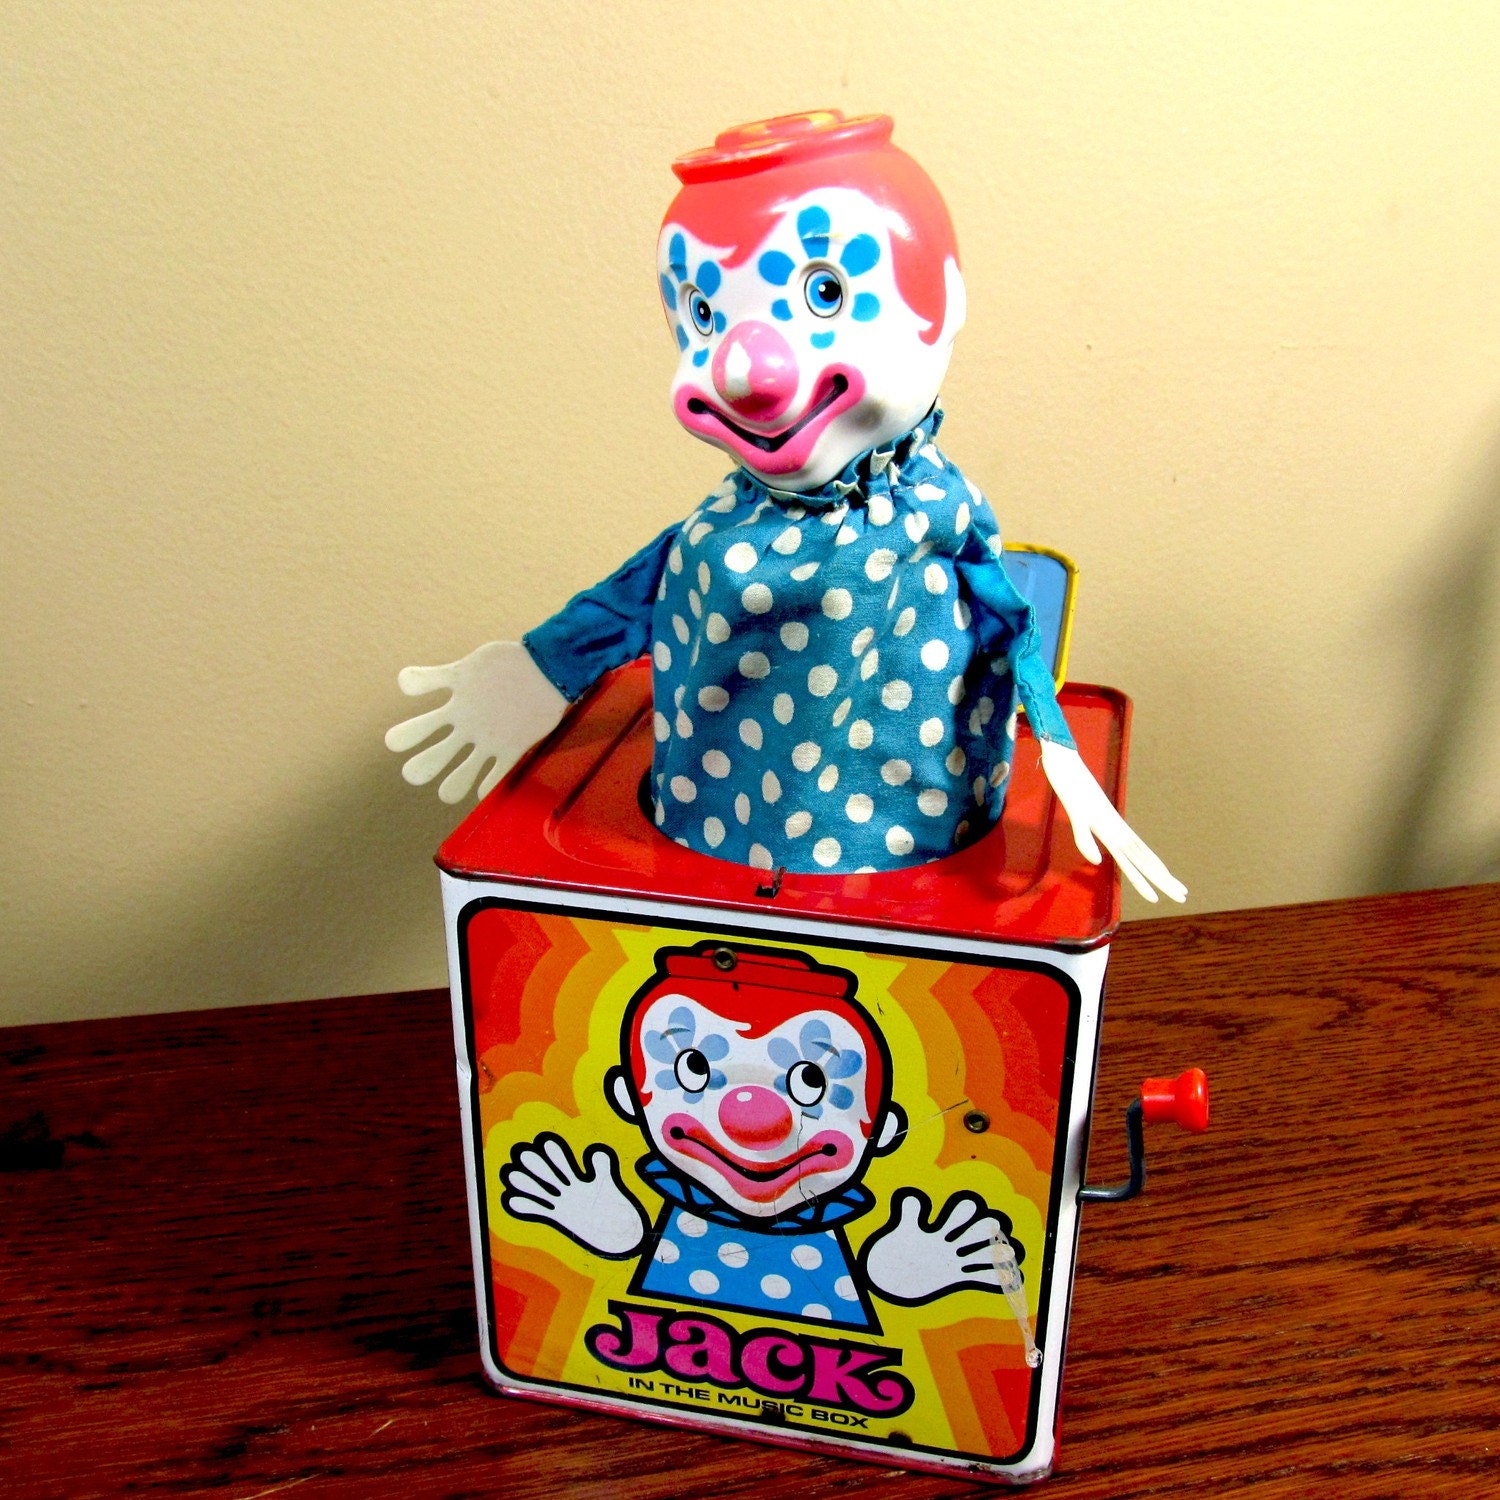 Mattel Pressed Tin Jack in the box, brightly colored and working condition